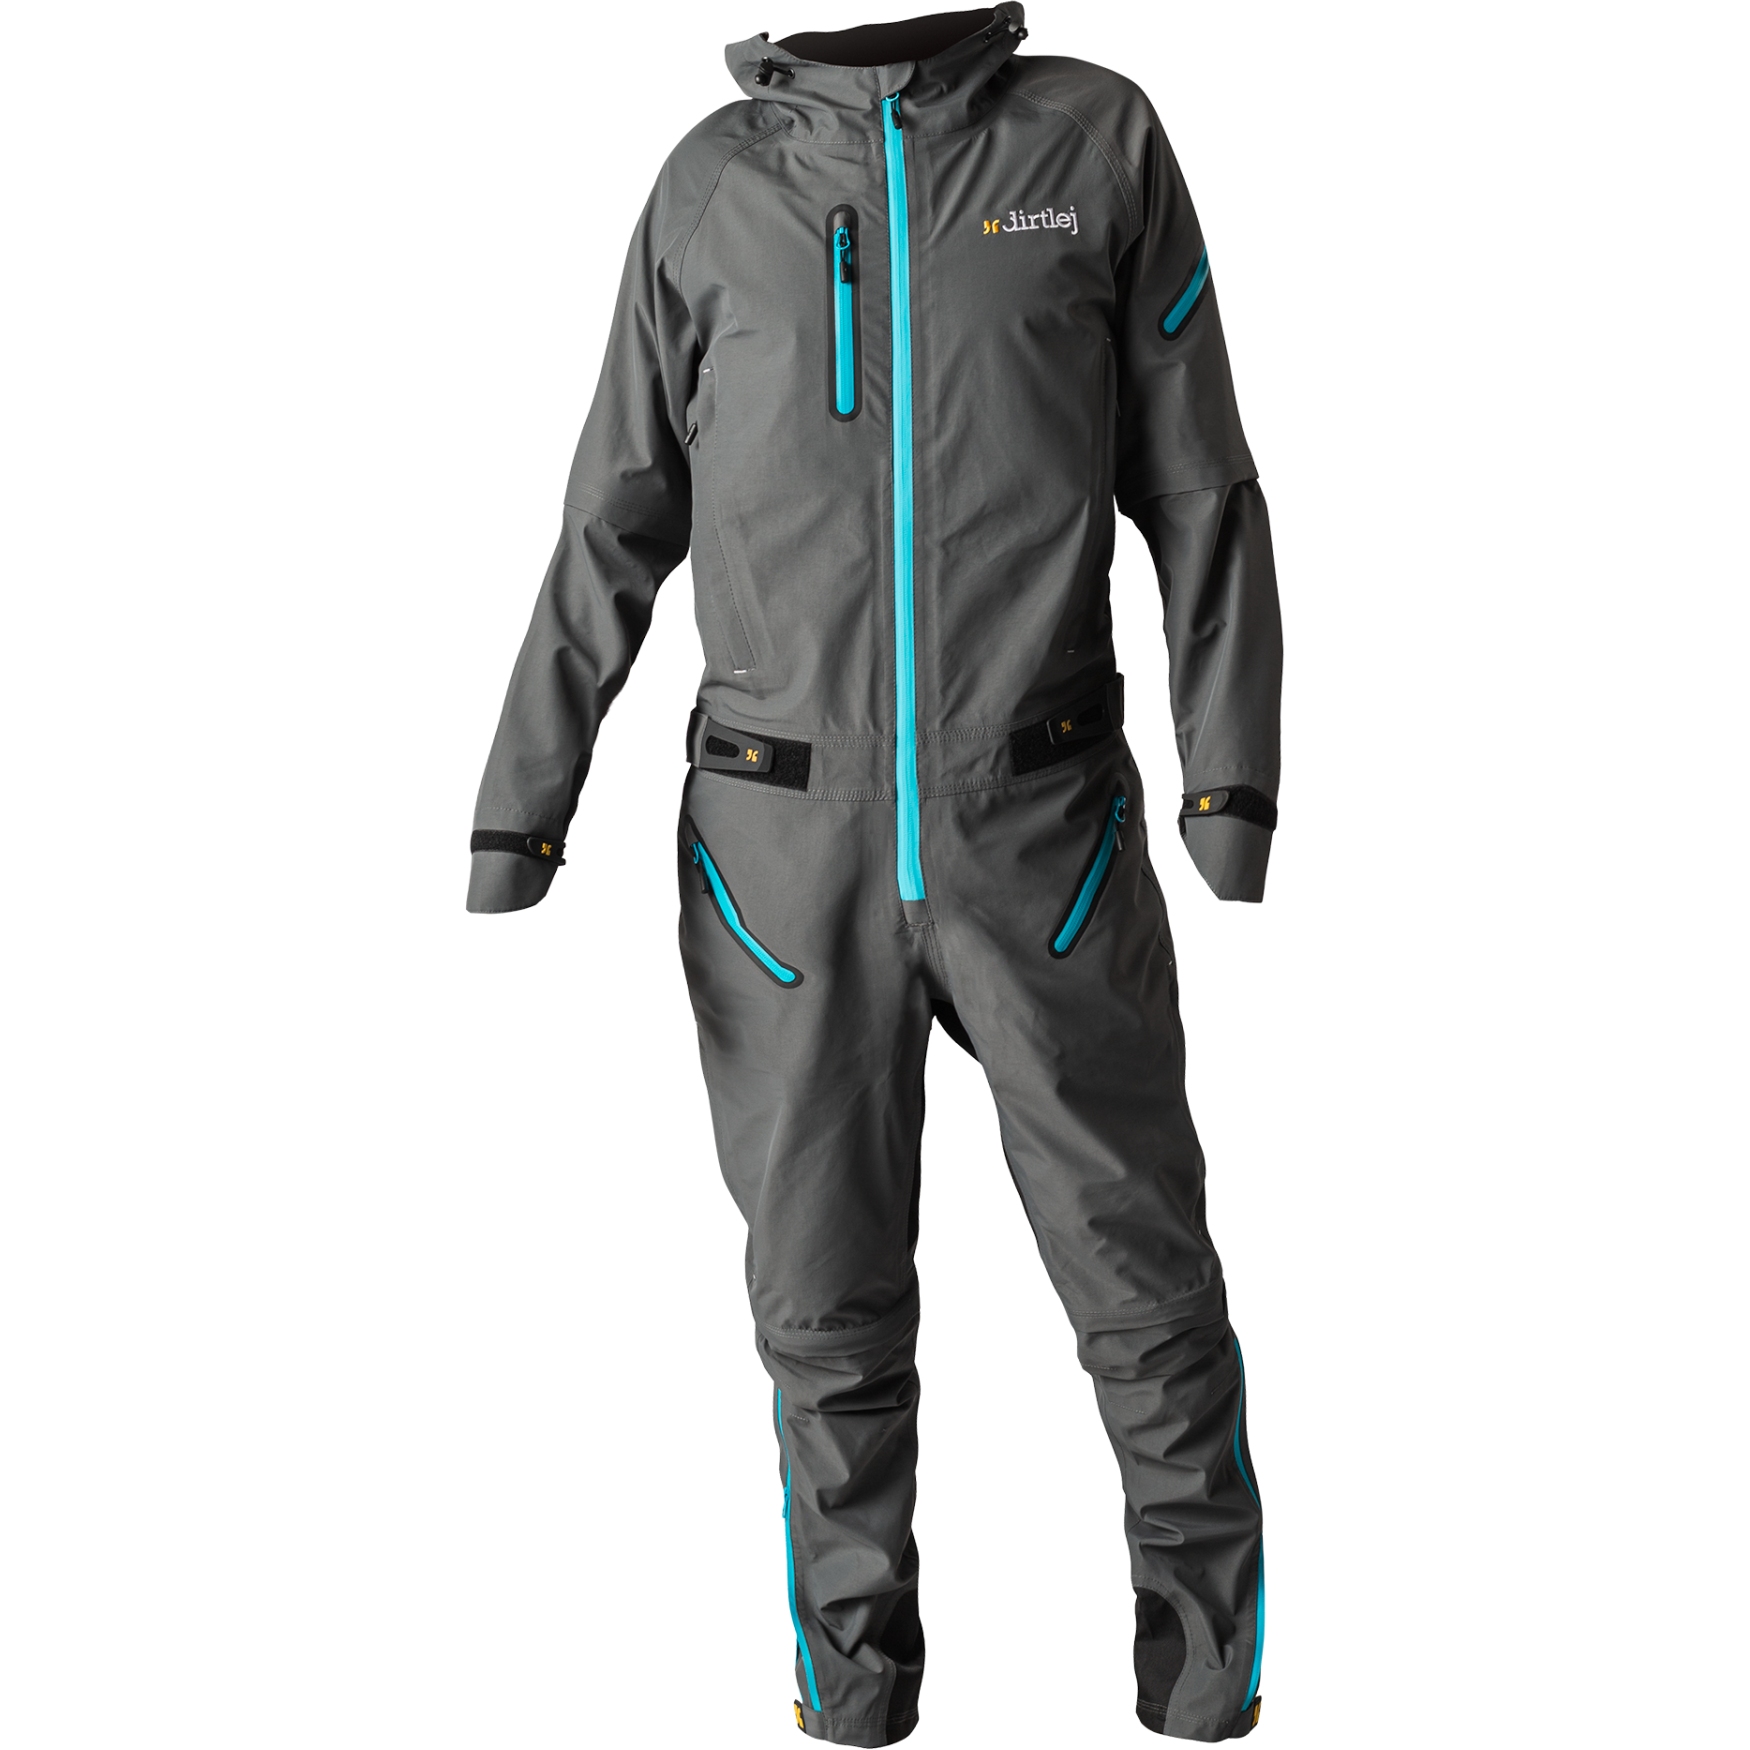 Picture of Dirtlej Dirtsuit - SFD Edition - grey/blue